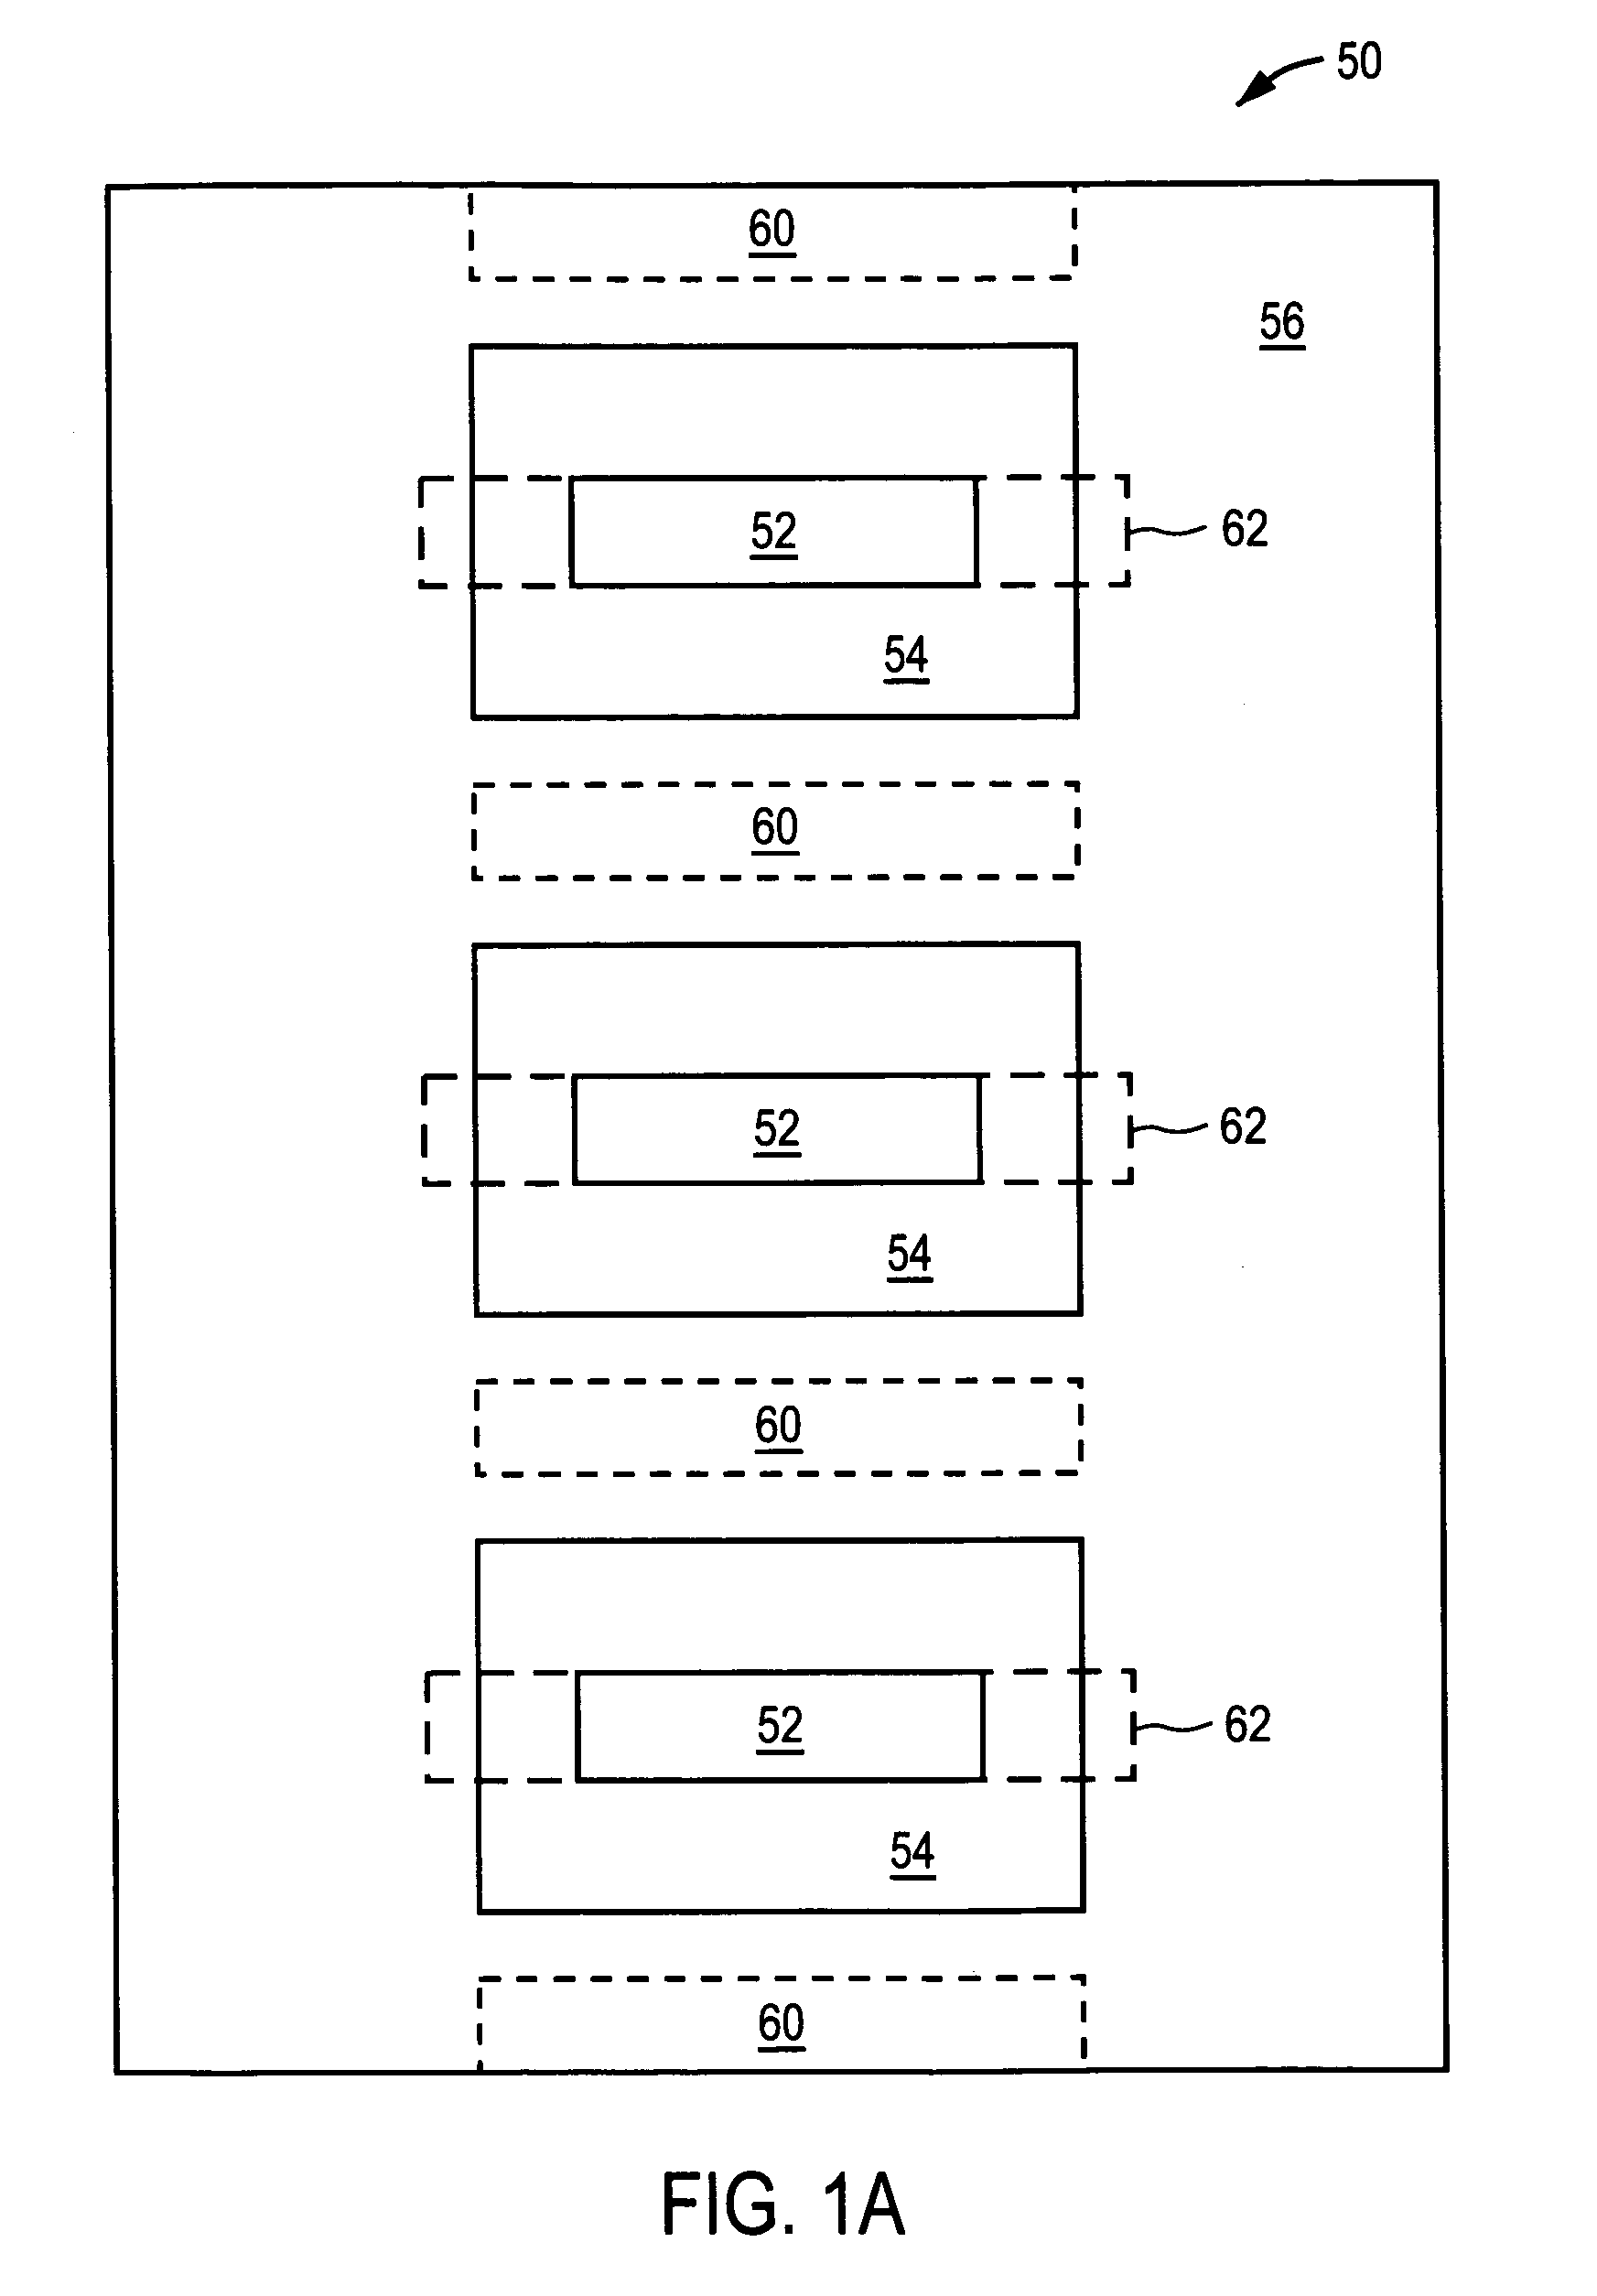 Electronic equipment data center or co-location facility designs and methods of making and using the same